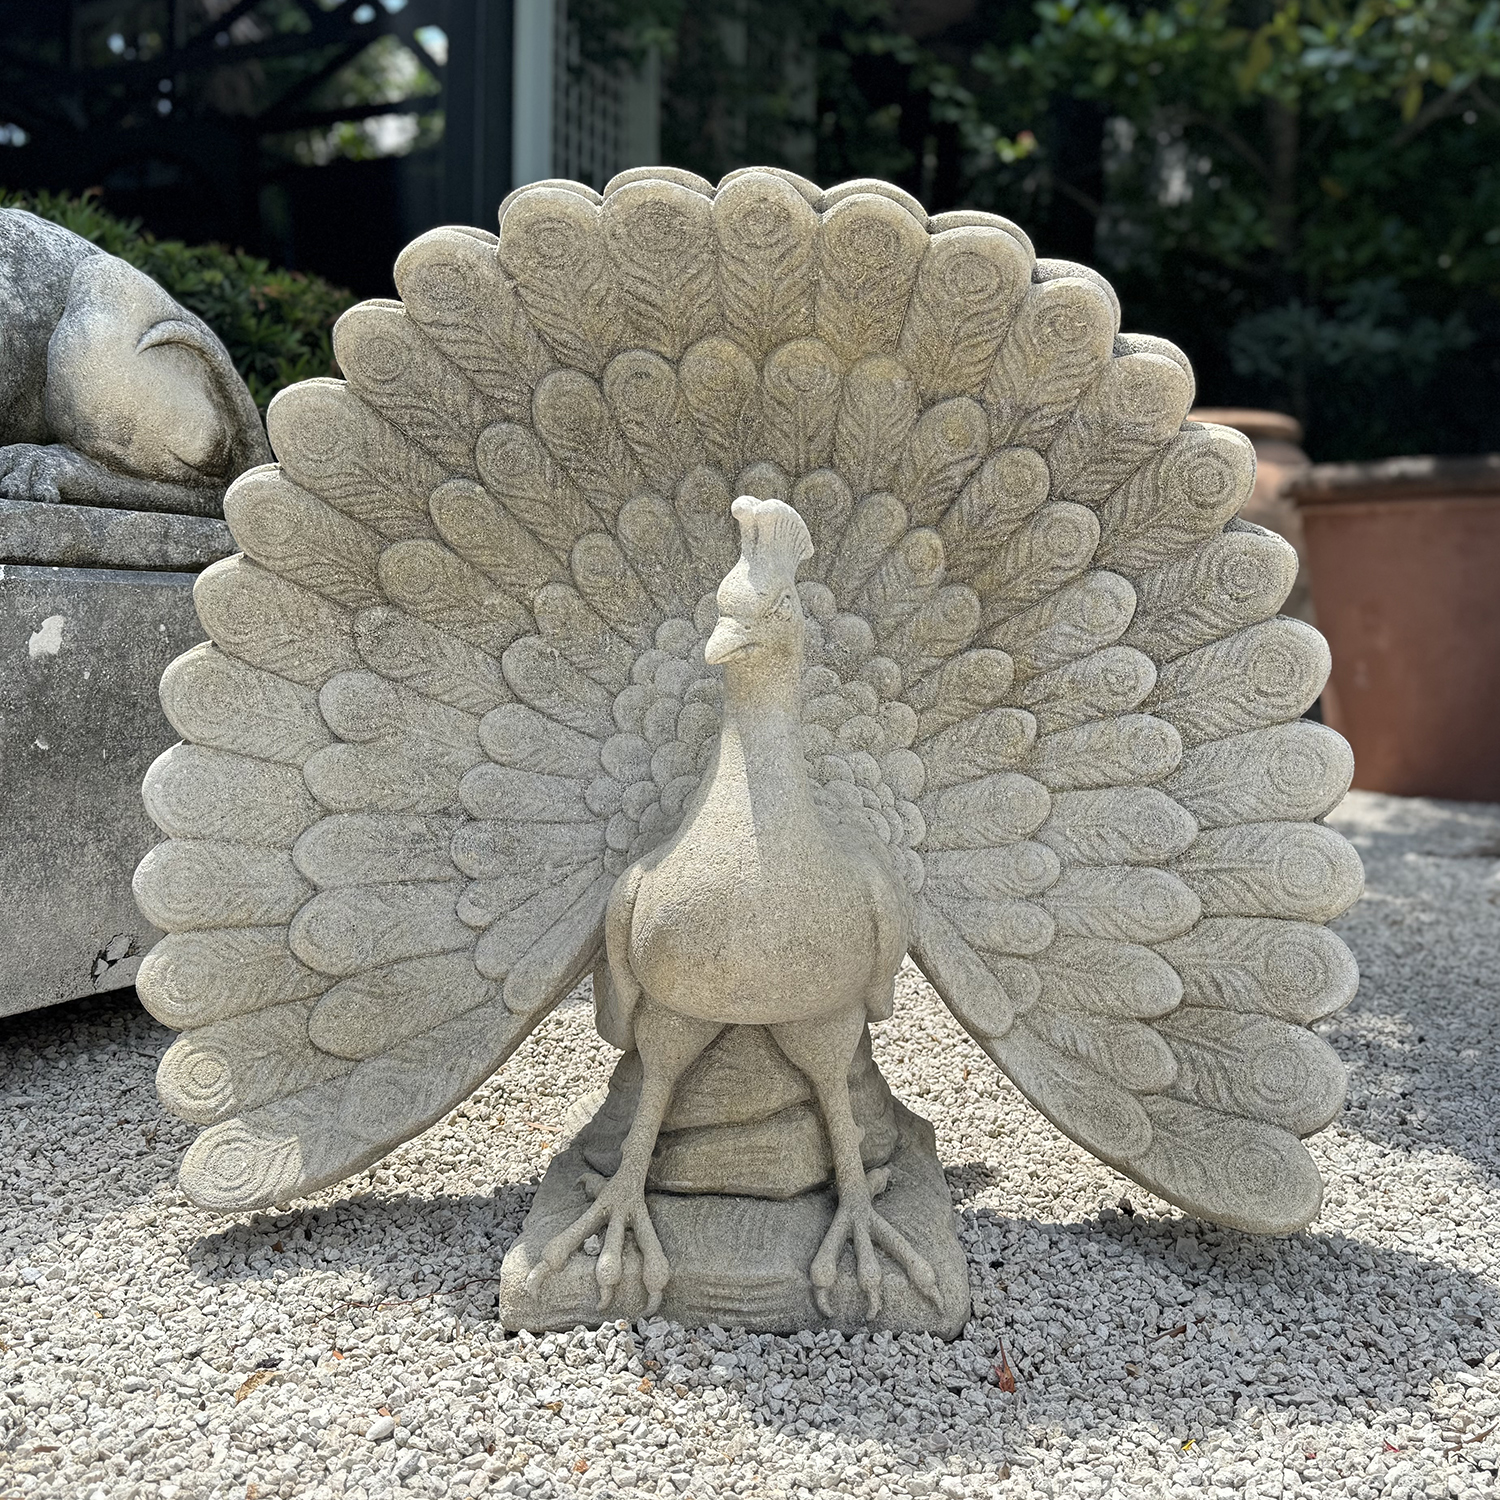 Garden Statuette of a Peacock in Hand Carved Limestone